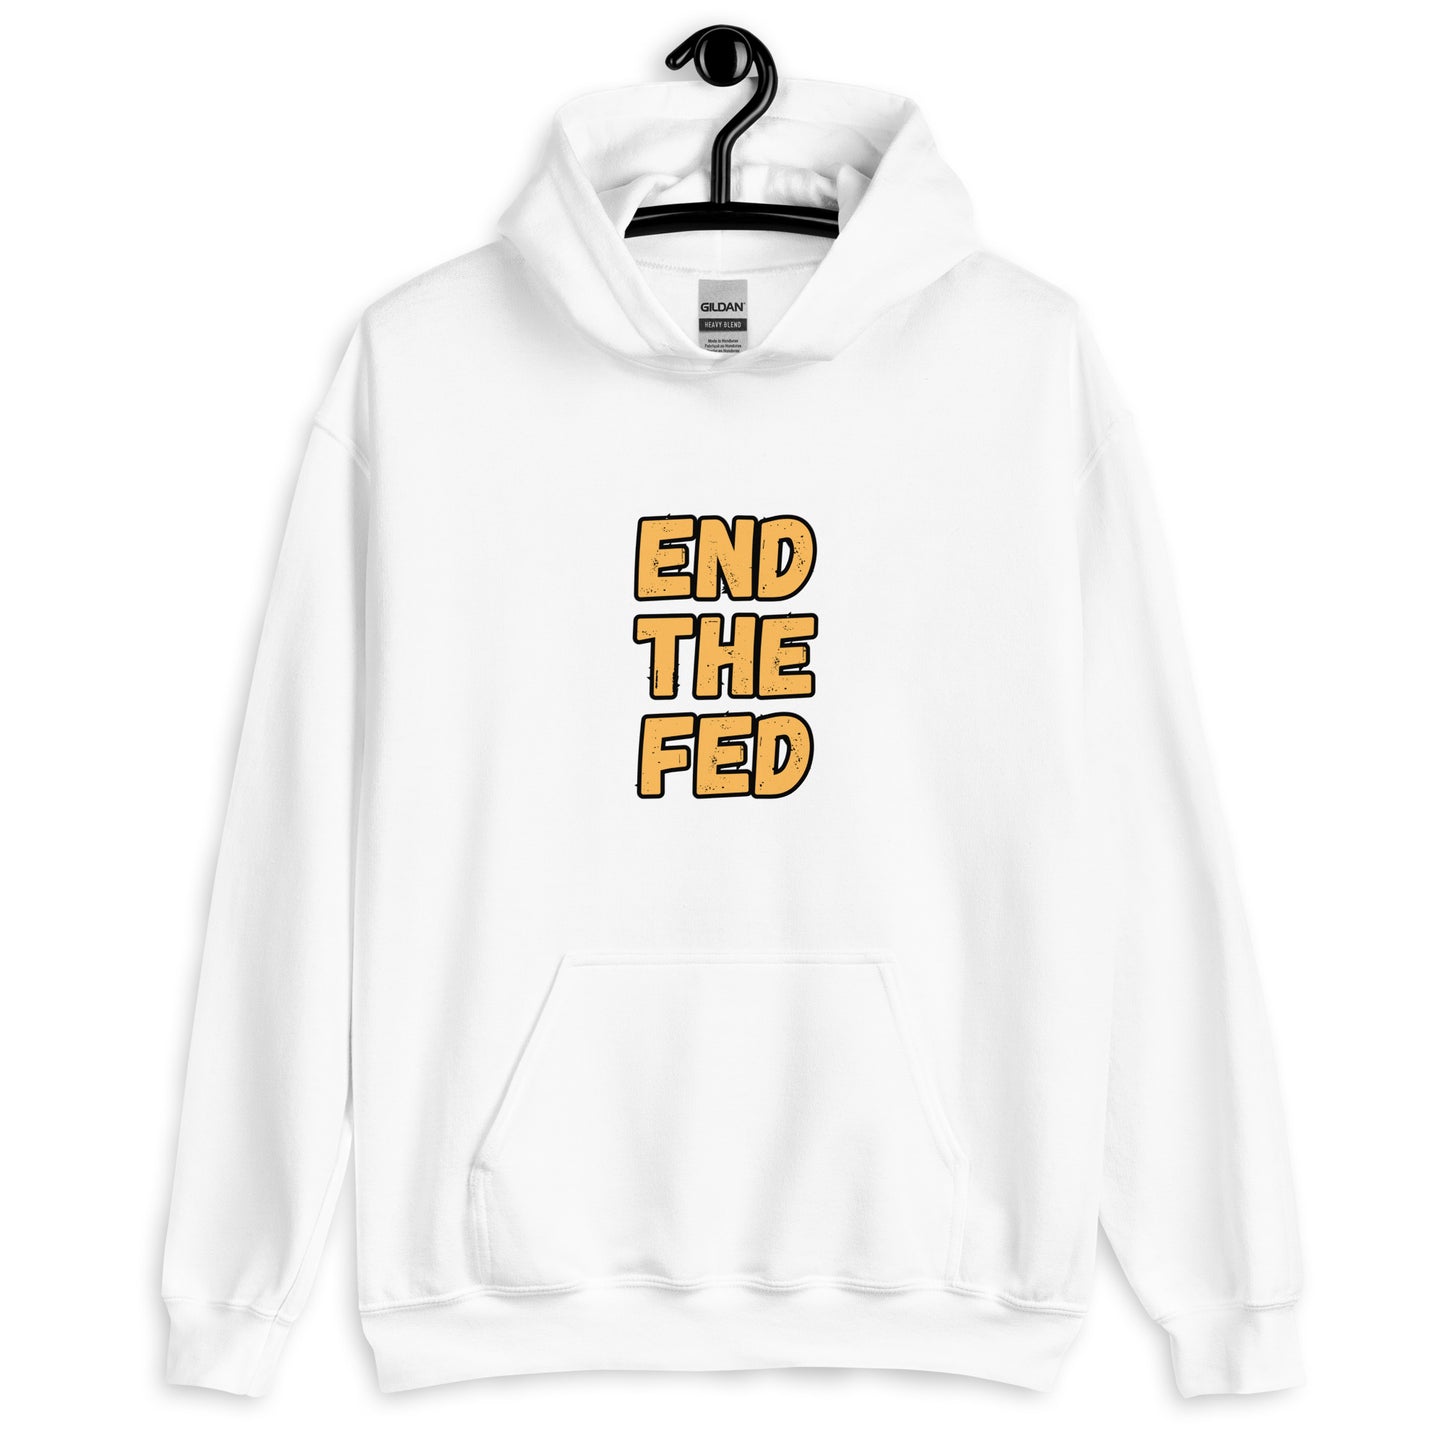 Make a Statement with our 'End the Fed' Unisex Hoodie